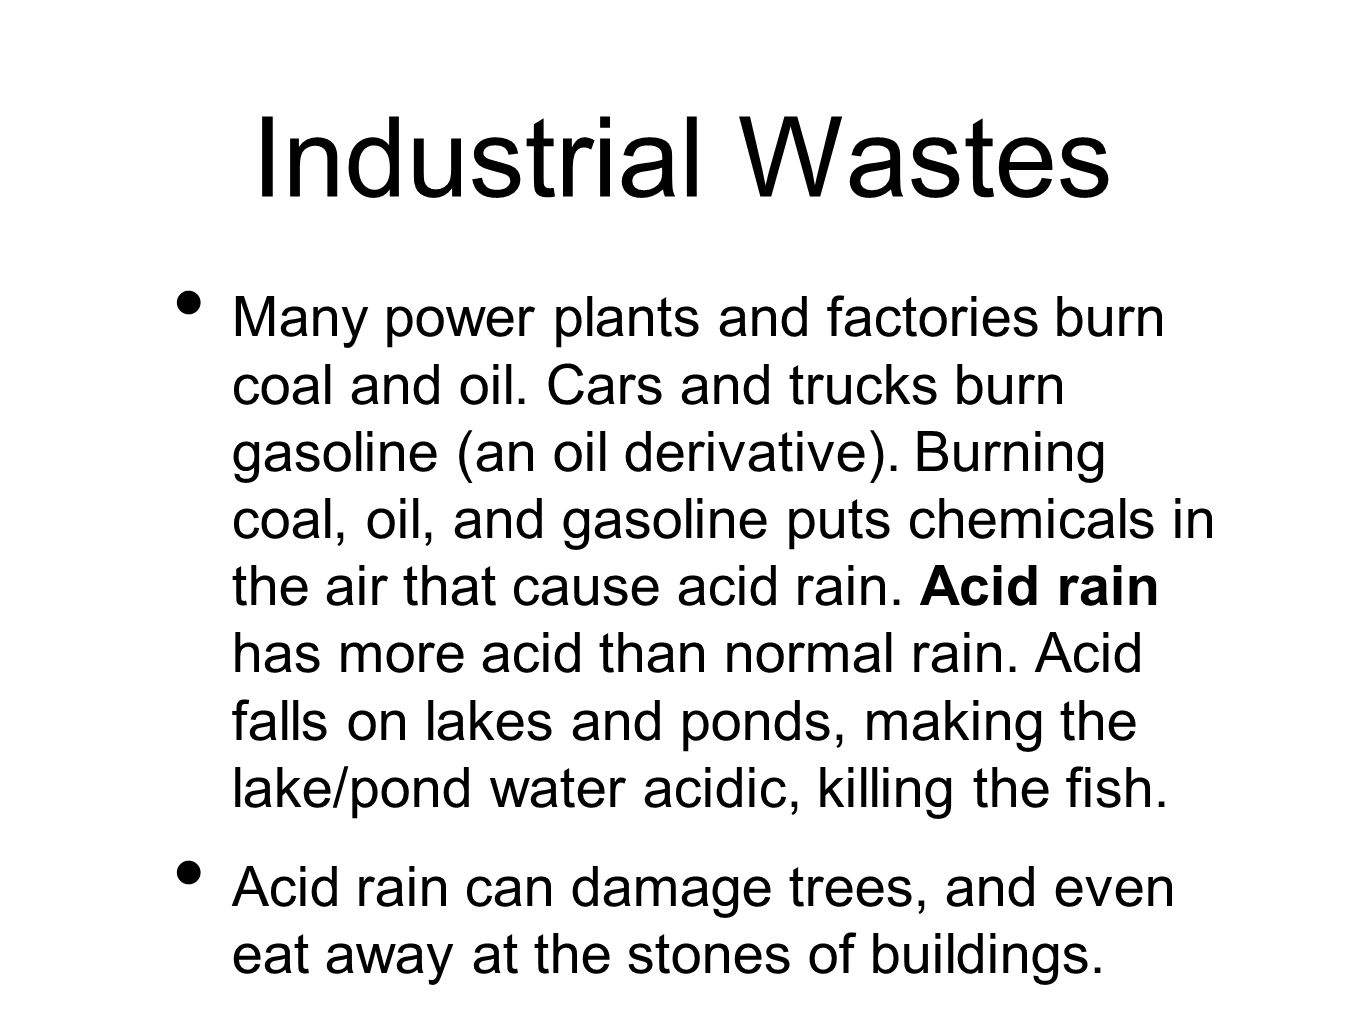 Industrial Wastes Many power plants and factories burn coal and oil.